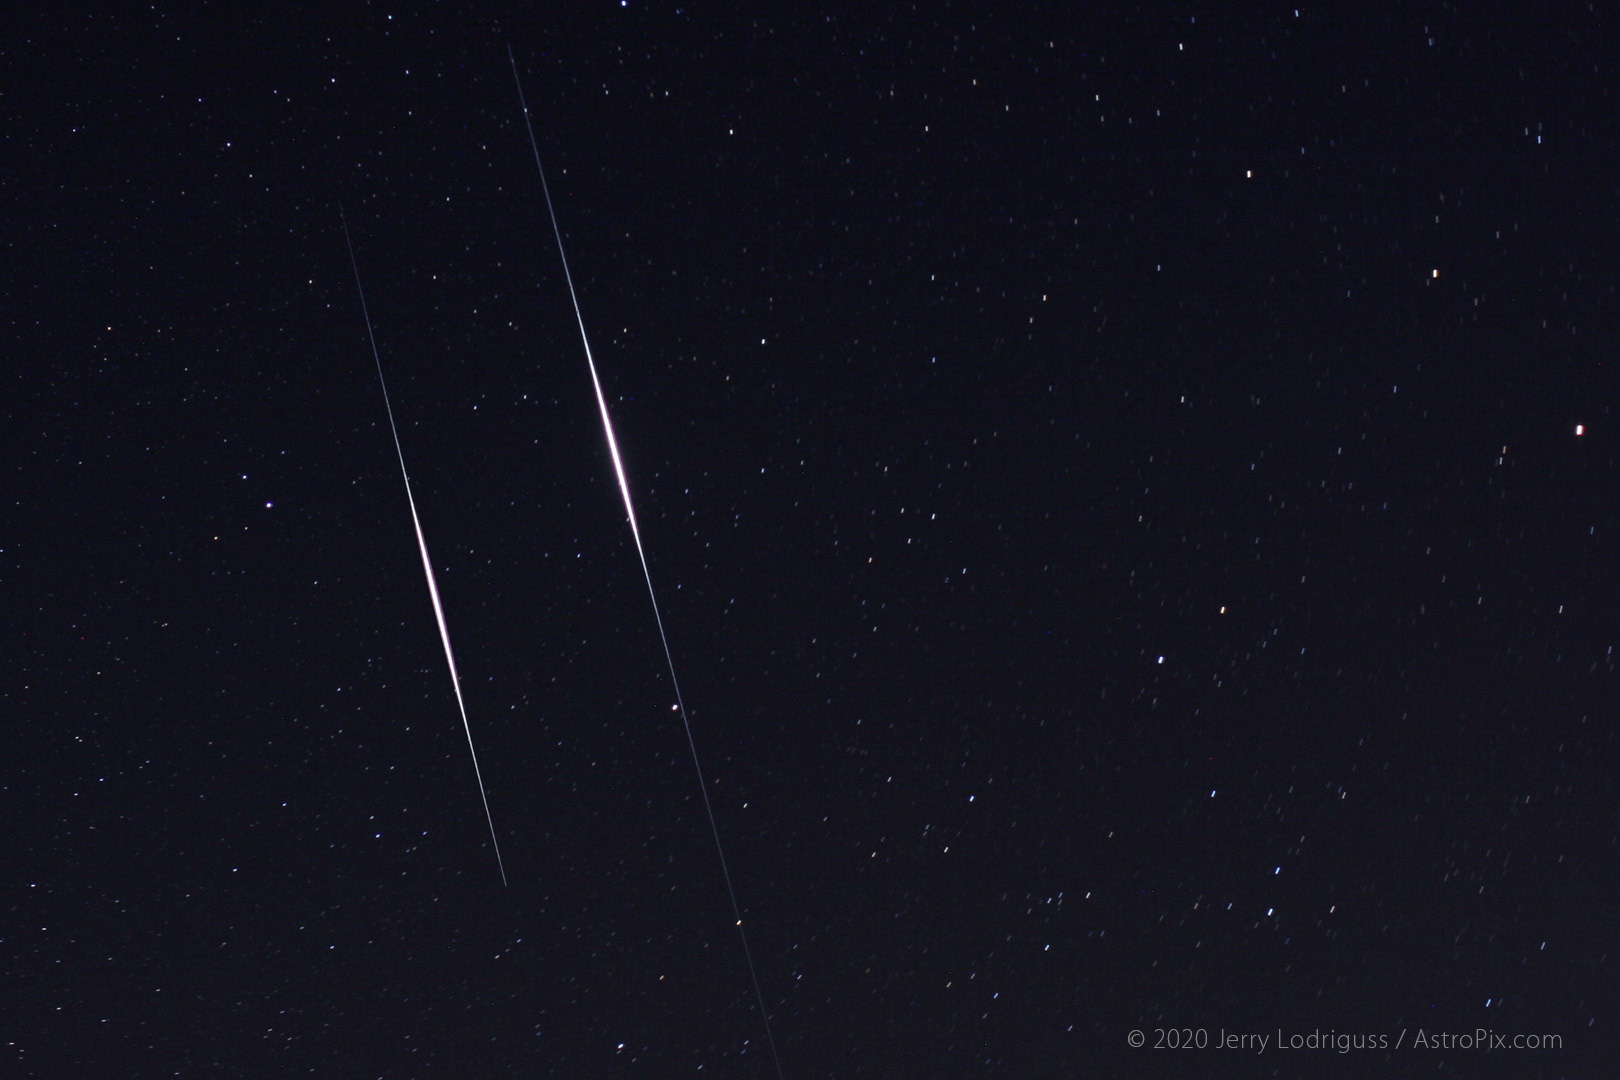 Two Iridium satellites "flare" together as they pass through Ursa Minor. The flares are caused by direct sunlight reflecting off of mirrored parts of the communications satellites.